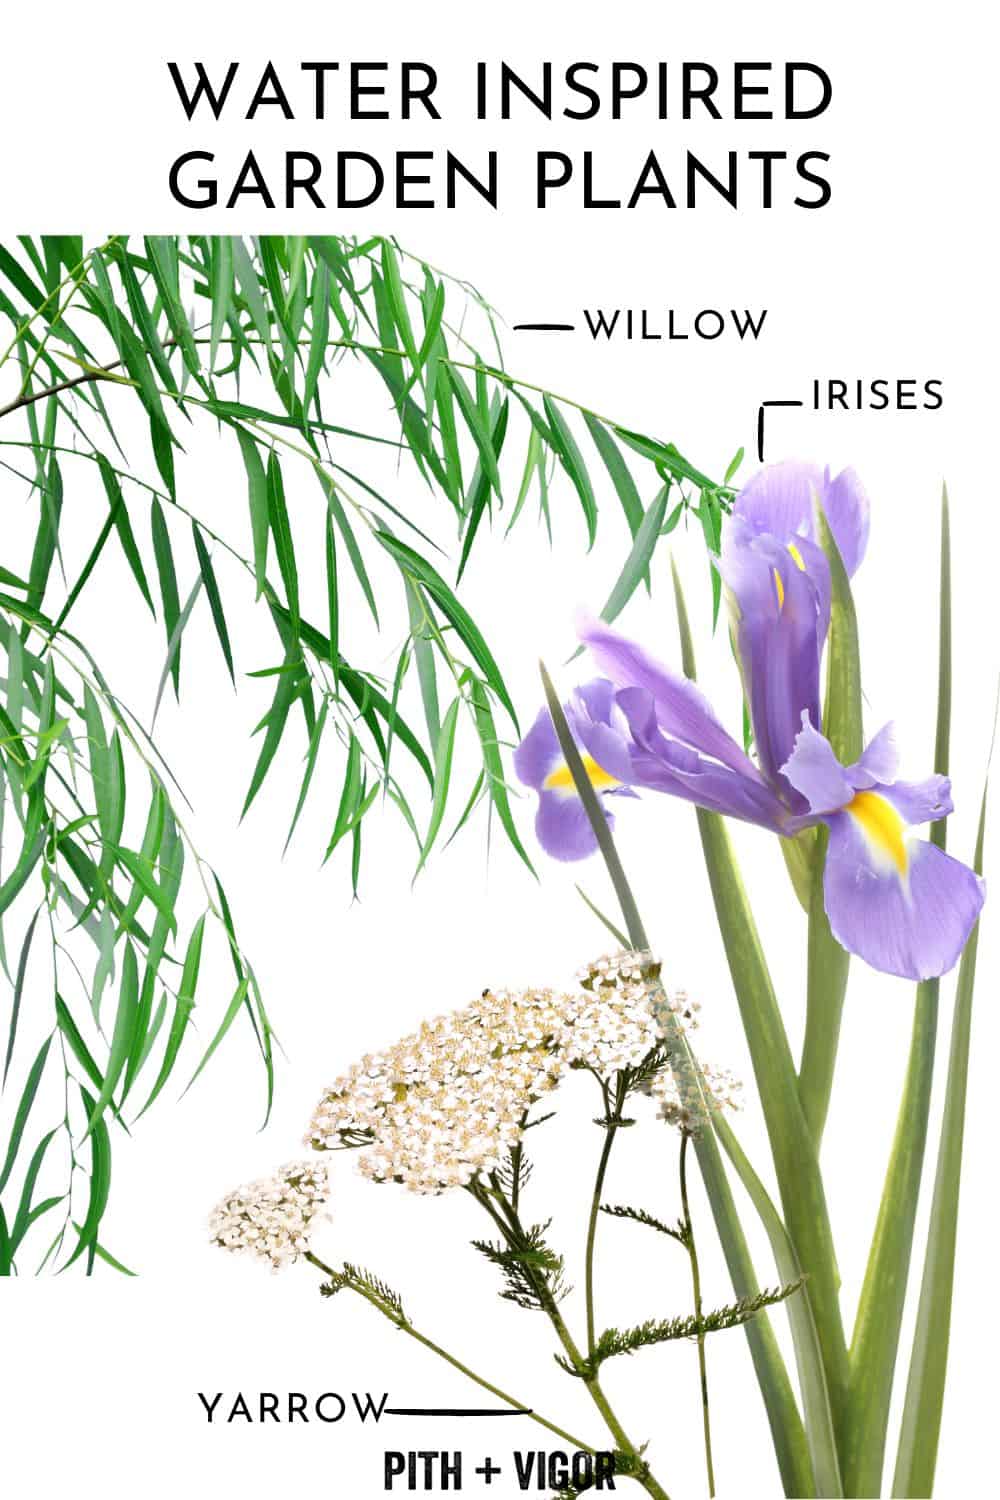 A collection of plant illustrations labeled as "Water Inspired Garden Plants," featuring a willow branch with narrow leaves, a purple iris flower, and a cluster of white yarrow flowers. Perfect for envisioning your yoga garden, the text "Pith + Vigor" is at the bottom of the image.